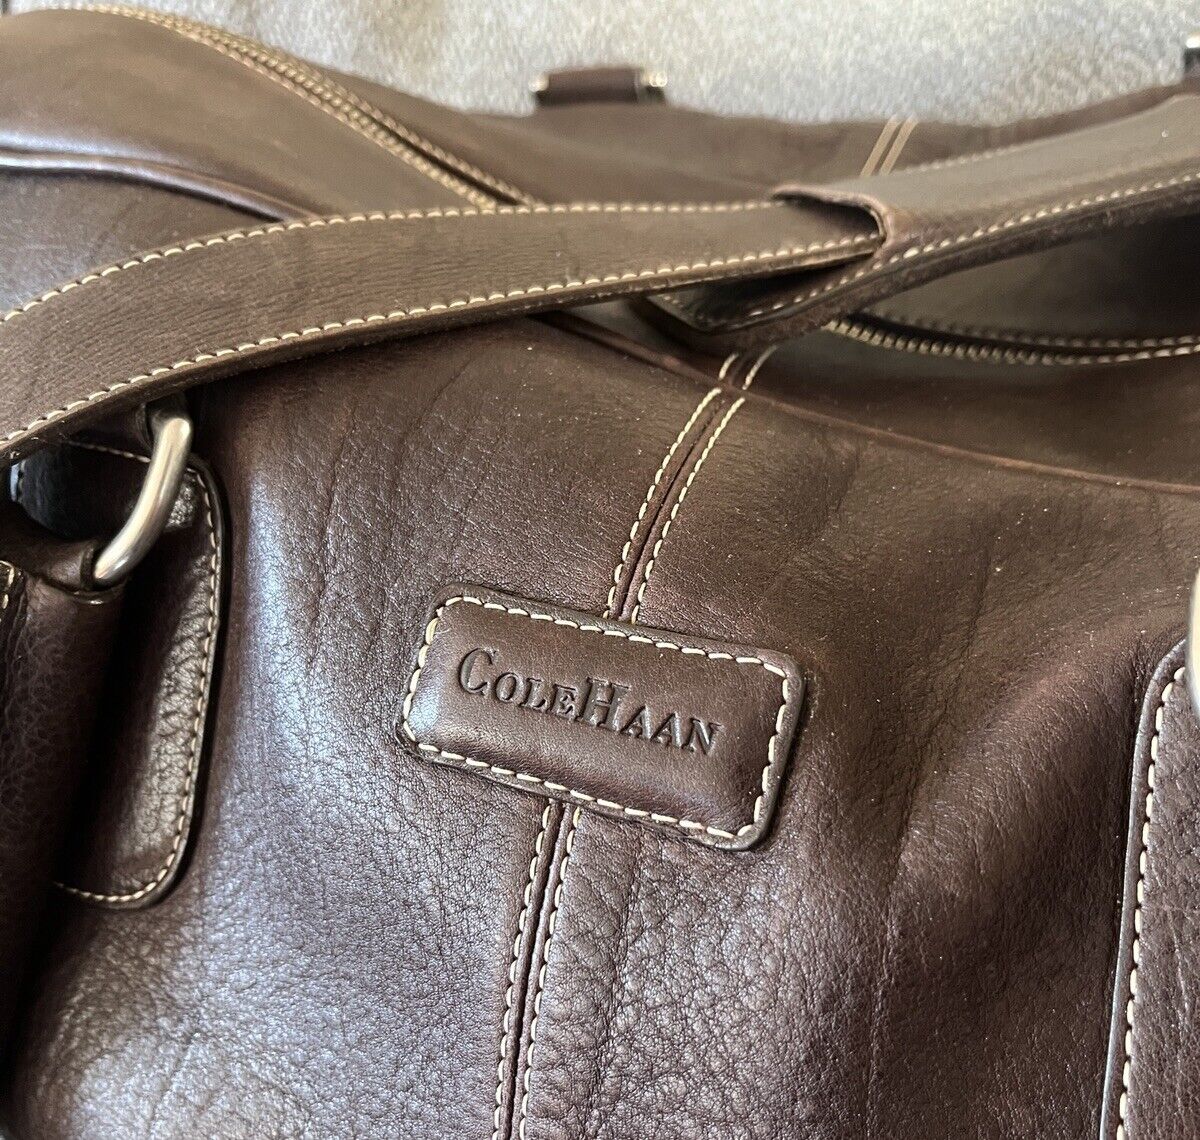 Cole Haan Large Brown Pebbled Leather Duffle Bag - image 2